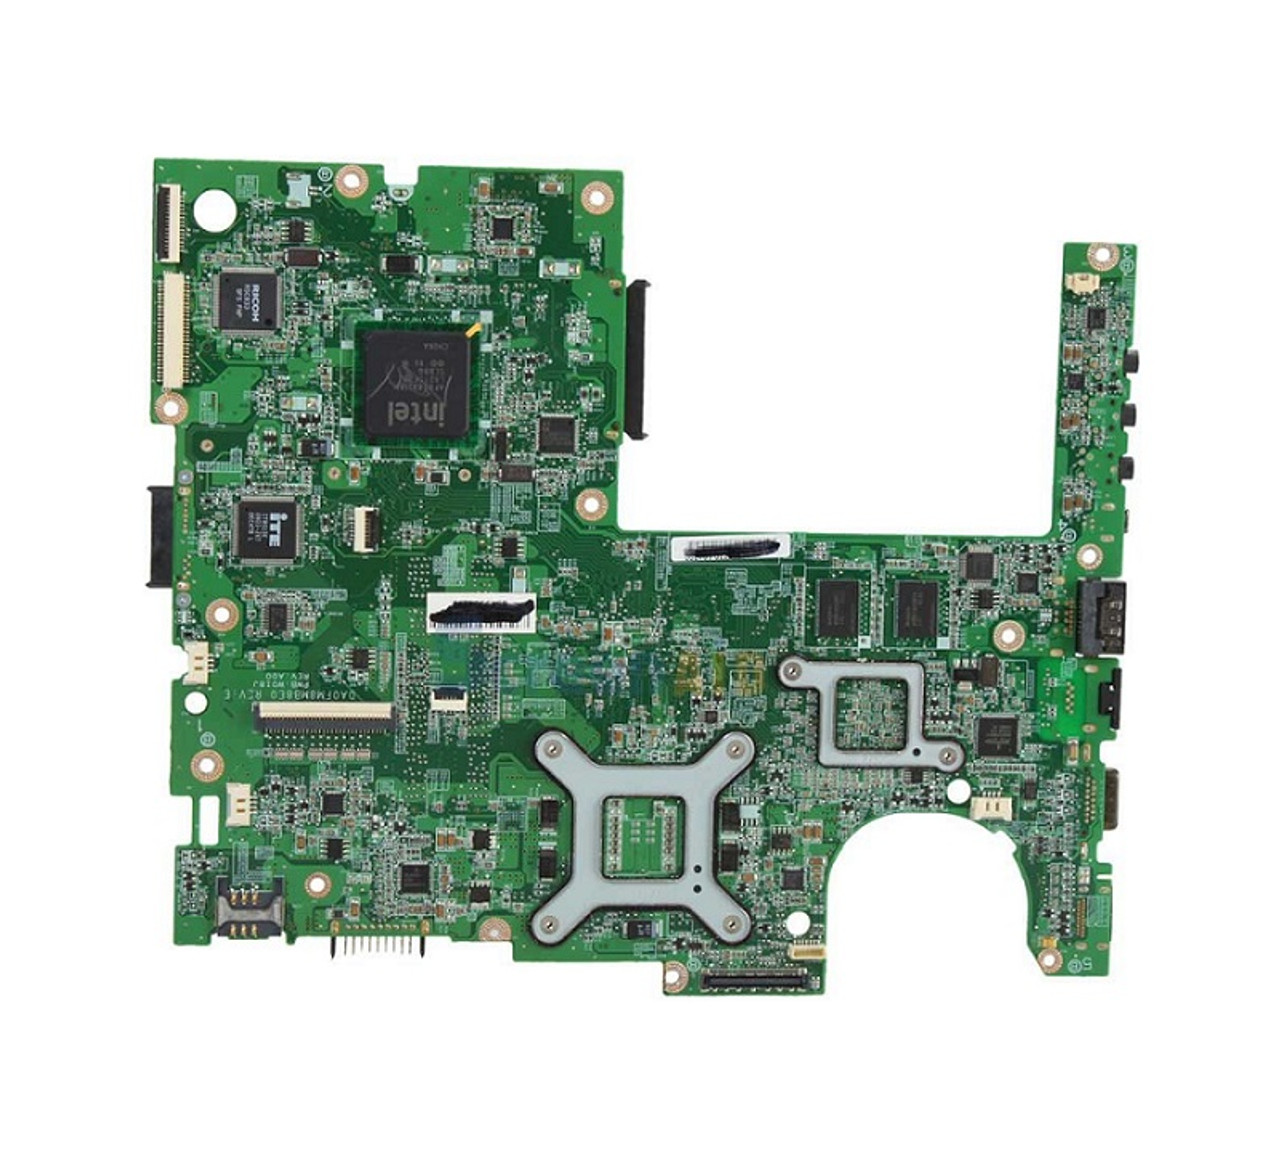 5TMMX - Dell System Board for Latitude E4310 Laptop Motheboard with Intel i5-560M 2.66GHz